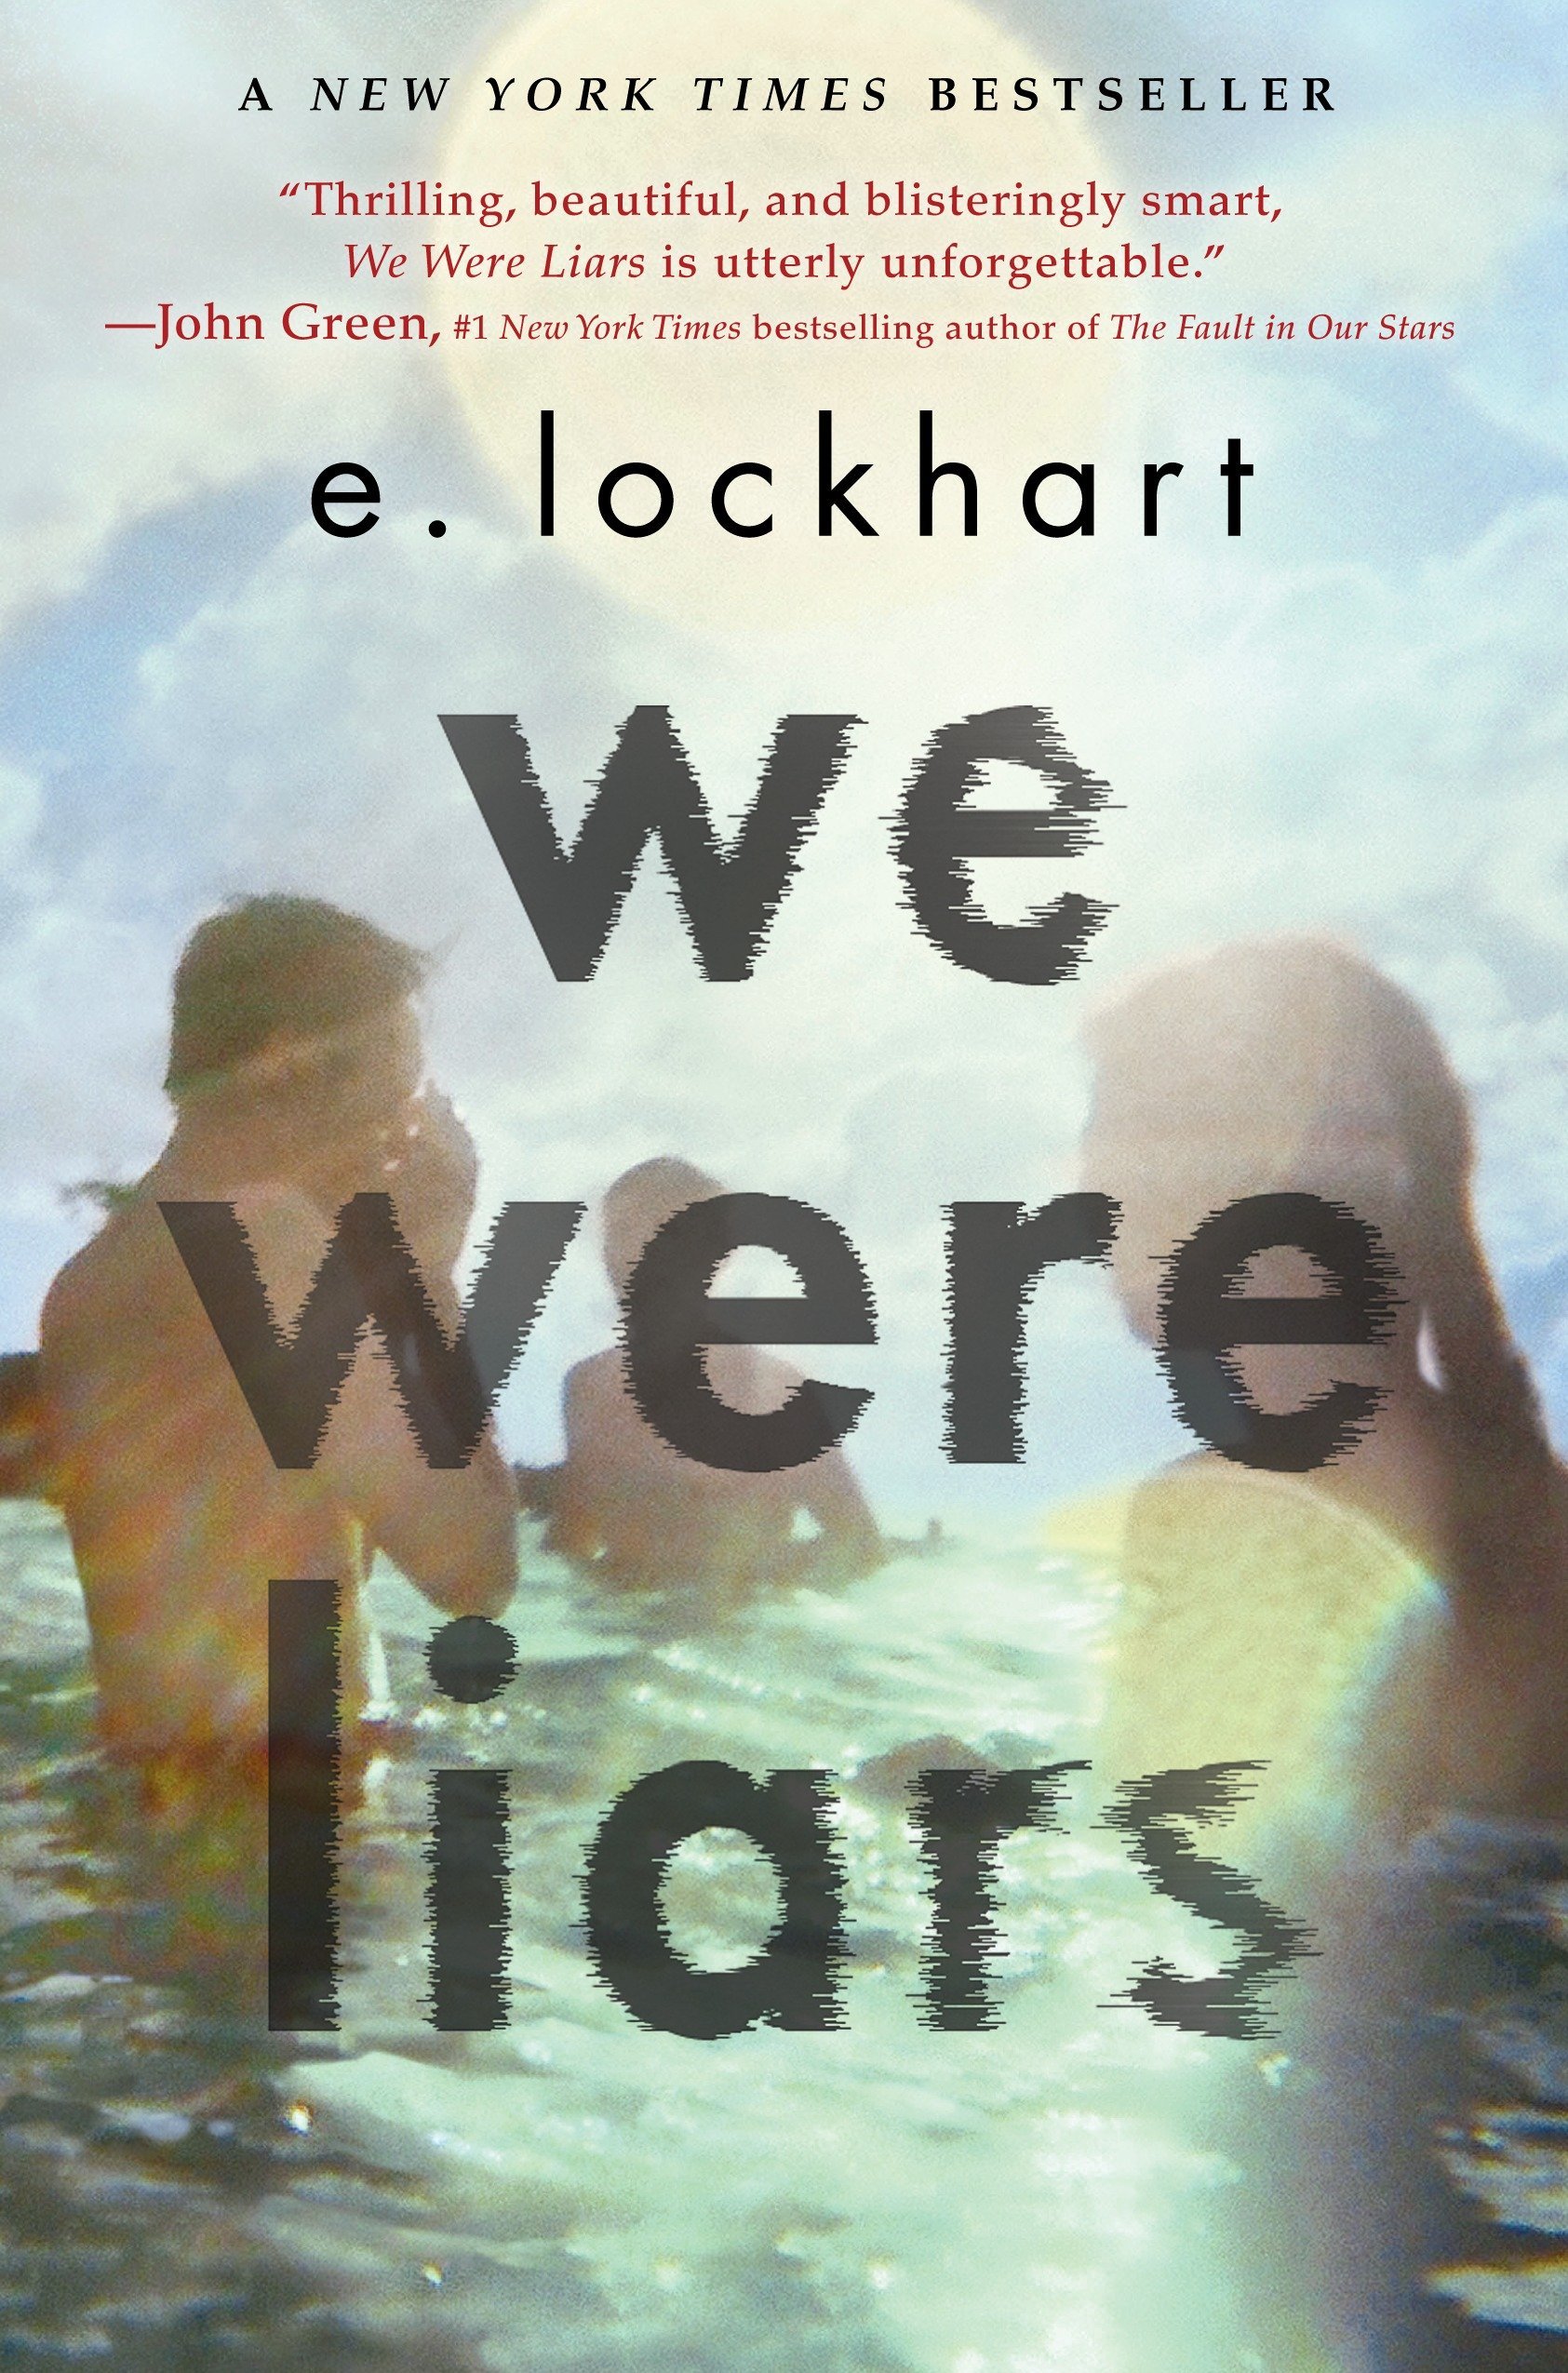 we were liars book review essay